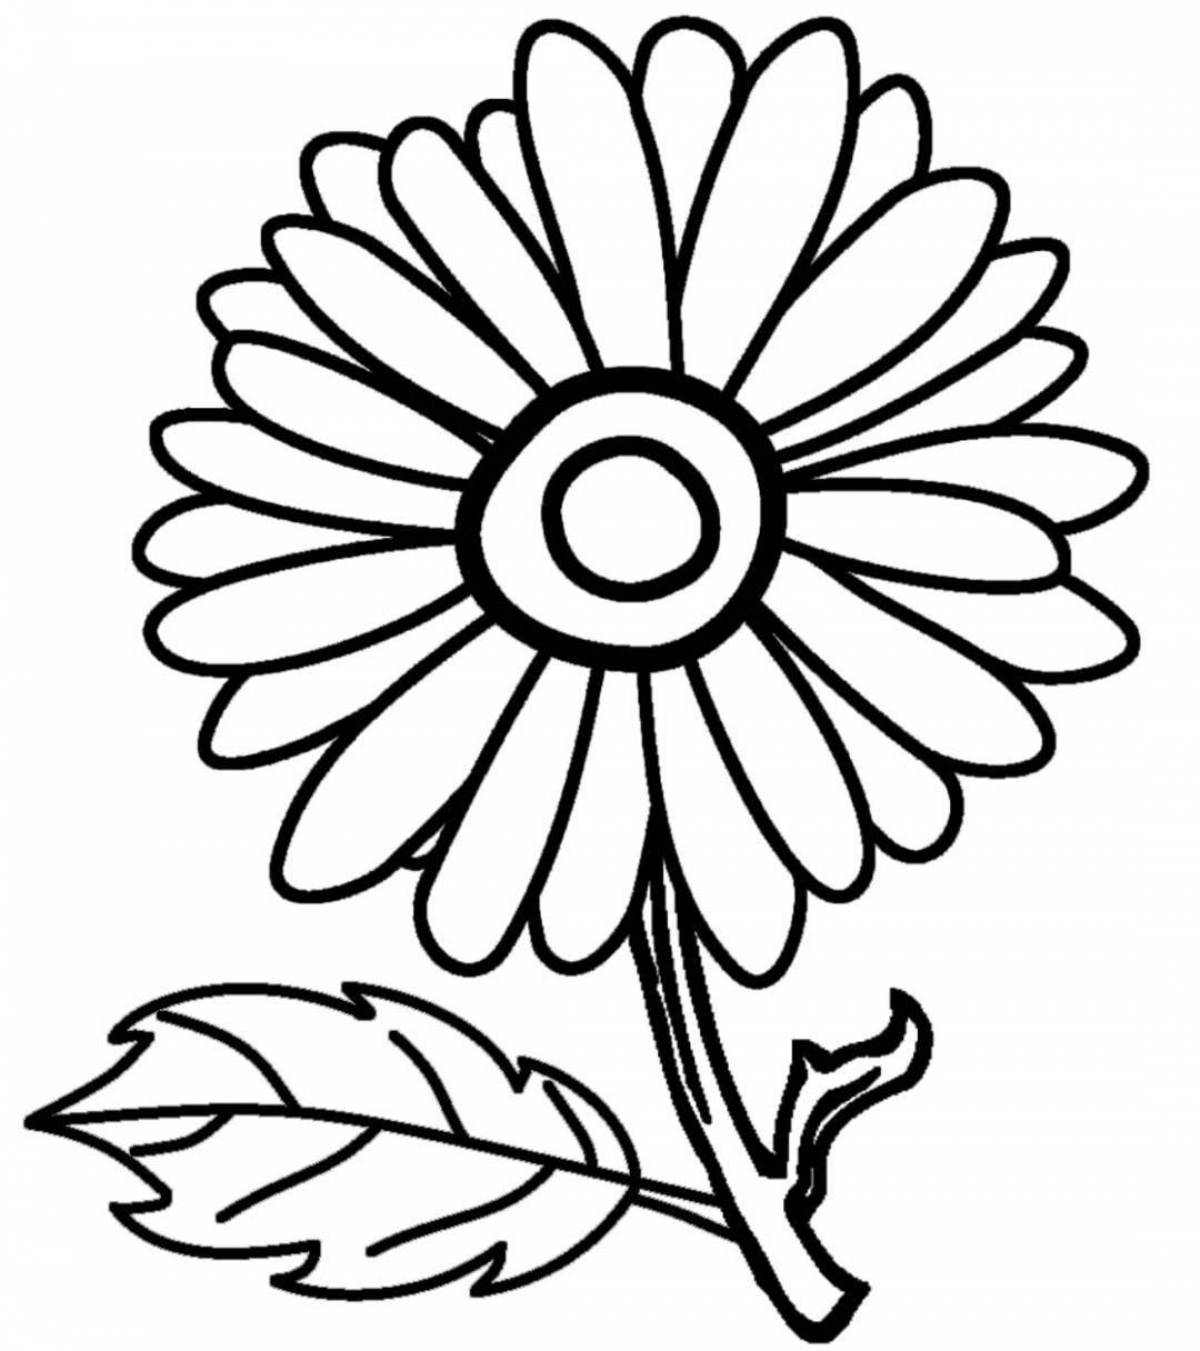 Fun daisy coloring for kids